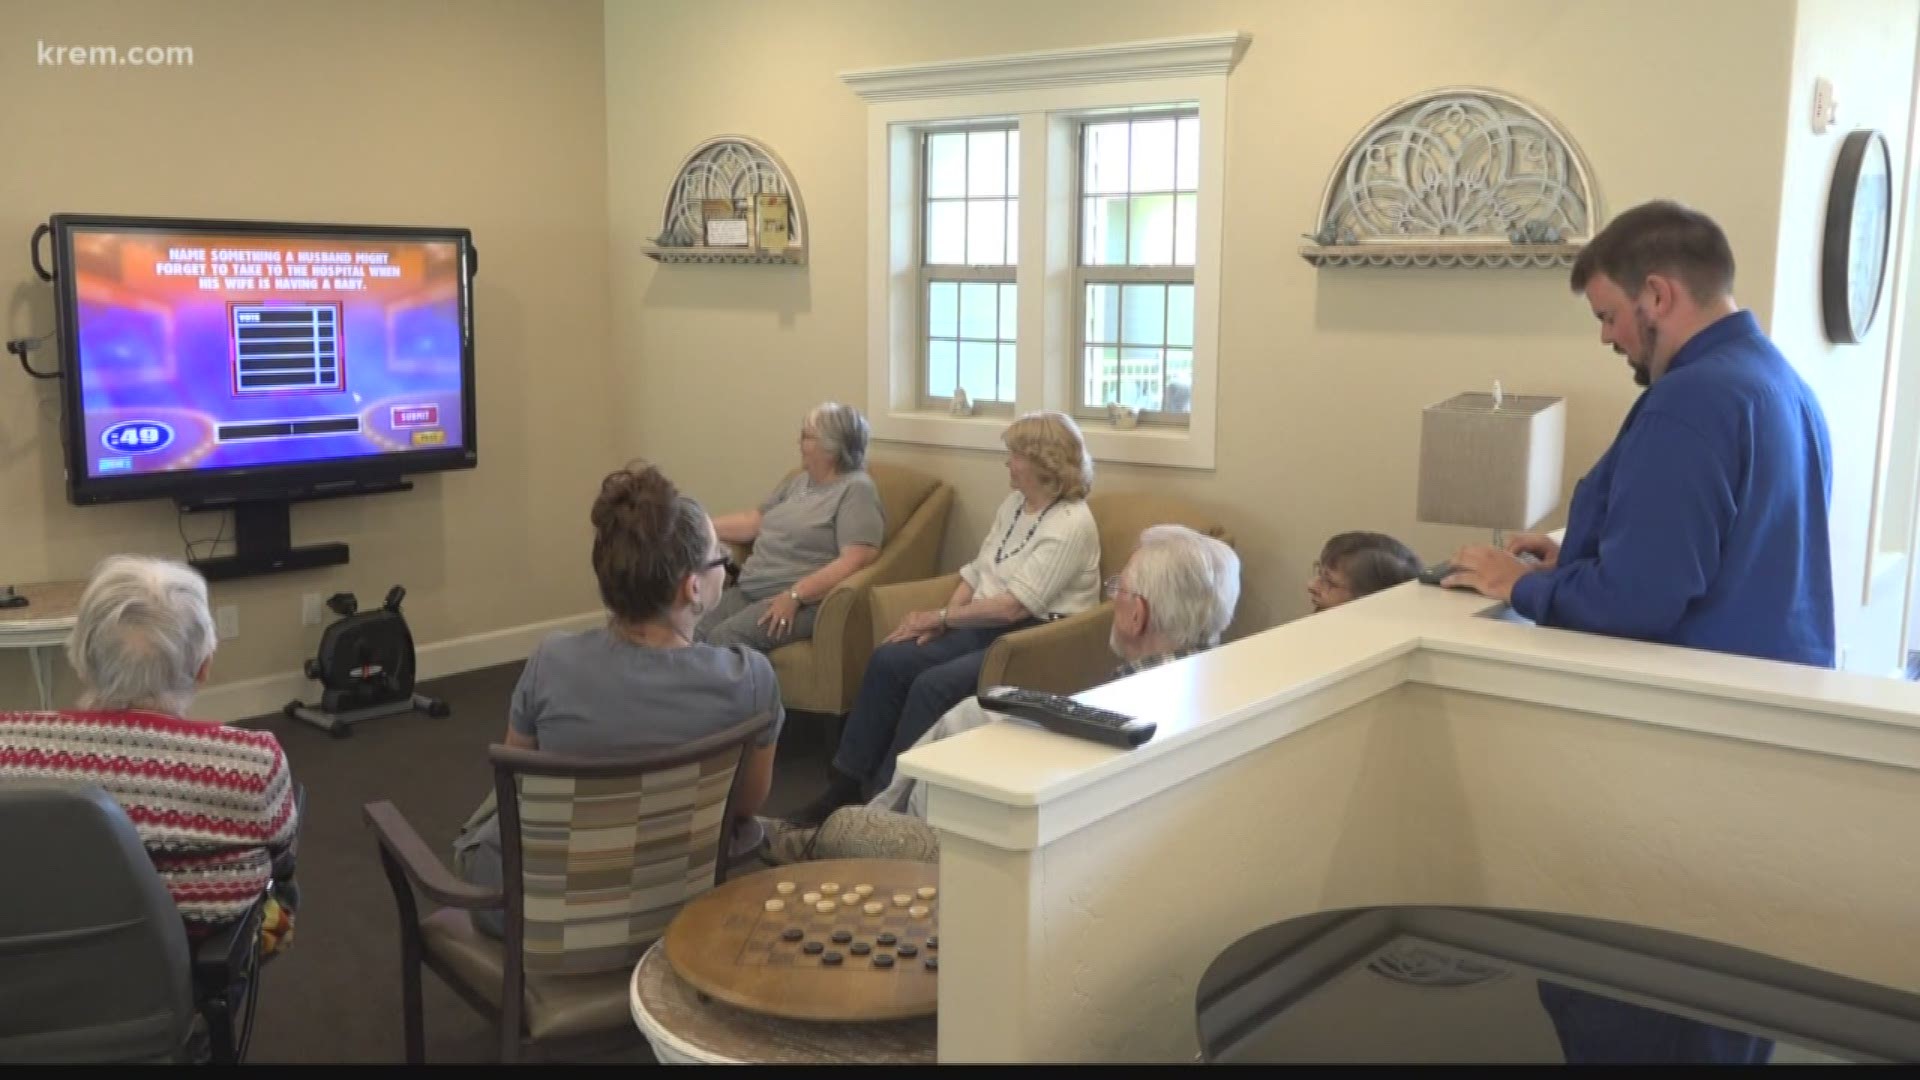 Games, old TV shows and more are helping connect residents and improve memory loss at The Renaissance retirement community in Coeur d'Alene.